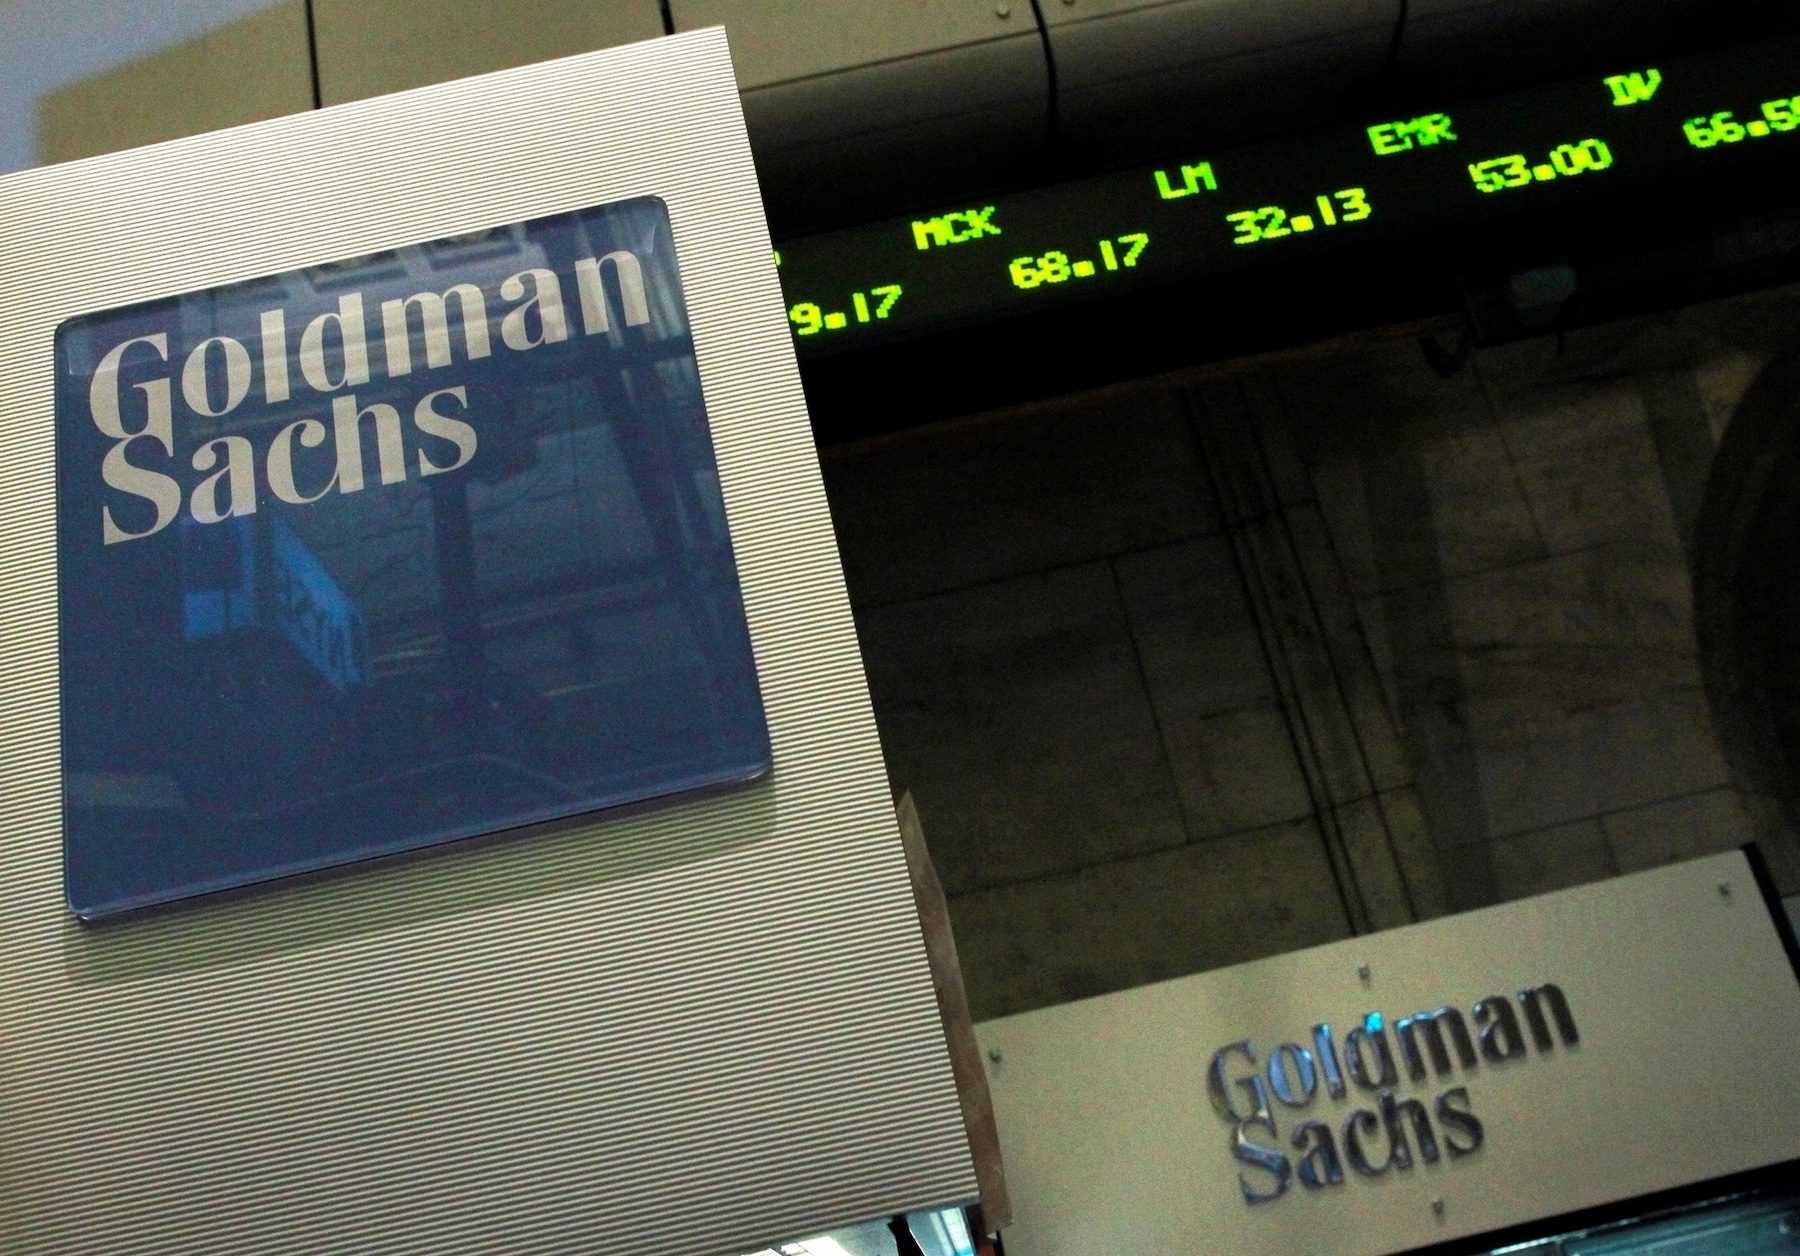 For Goldman Sachs, SVB’s botched stock sale had a silver lining